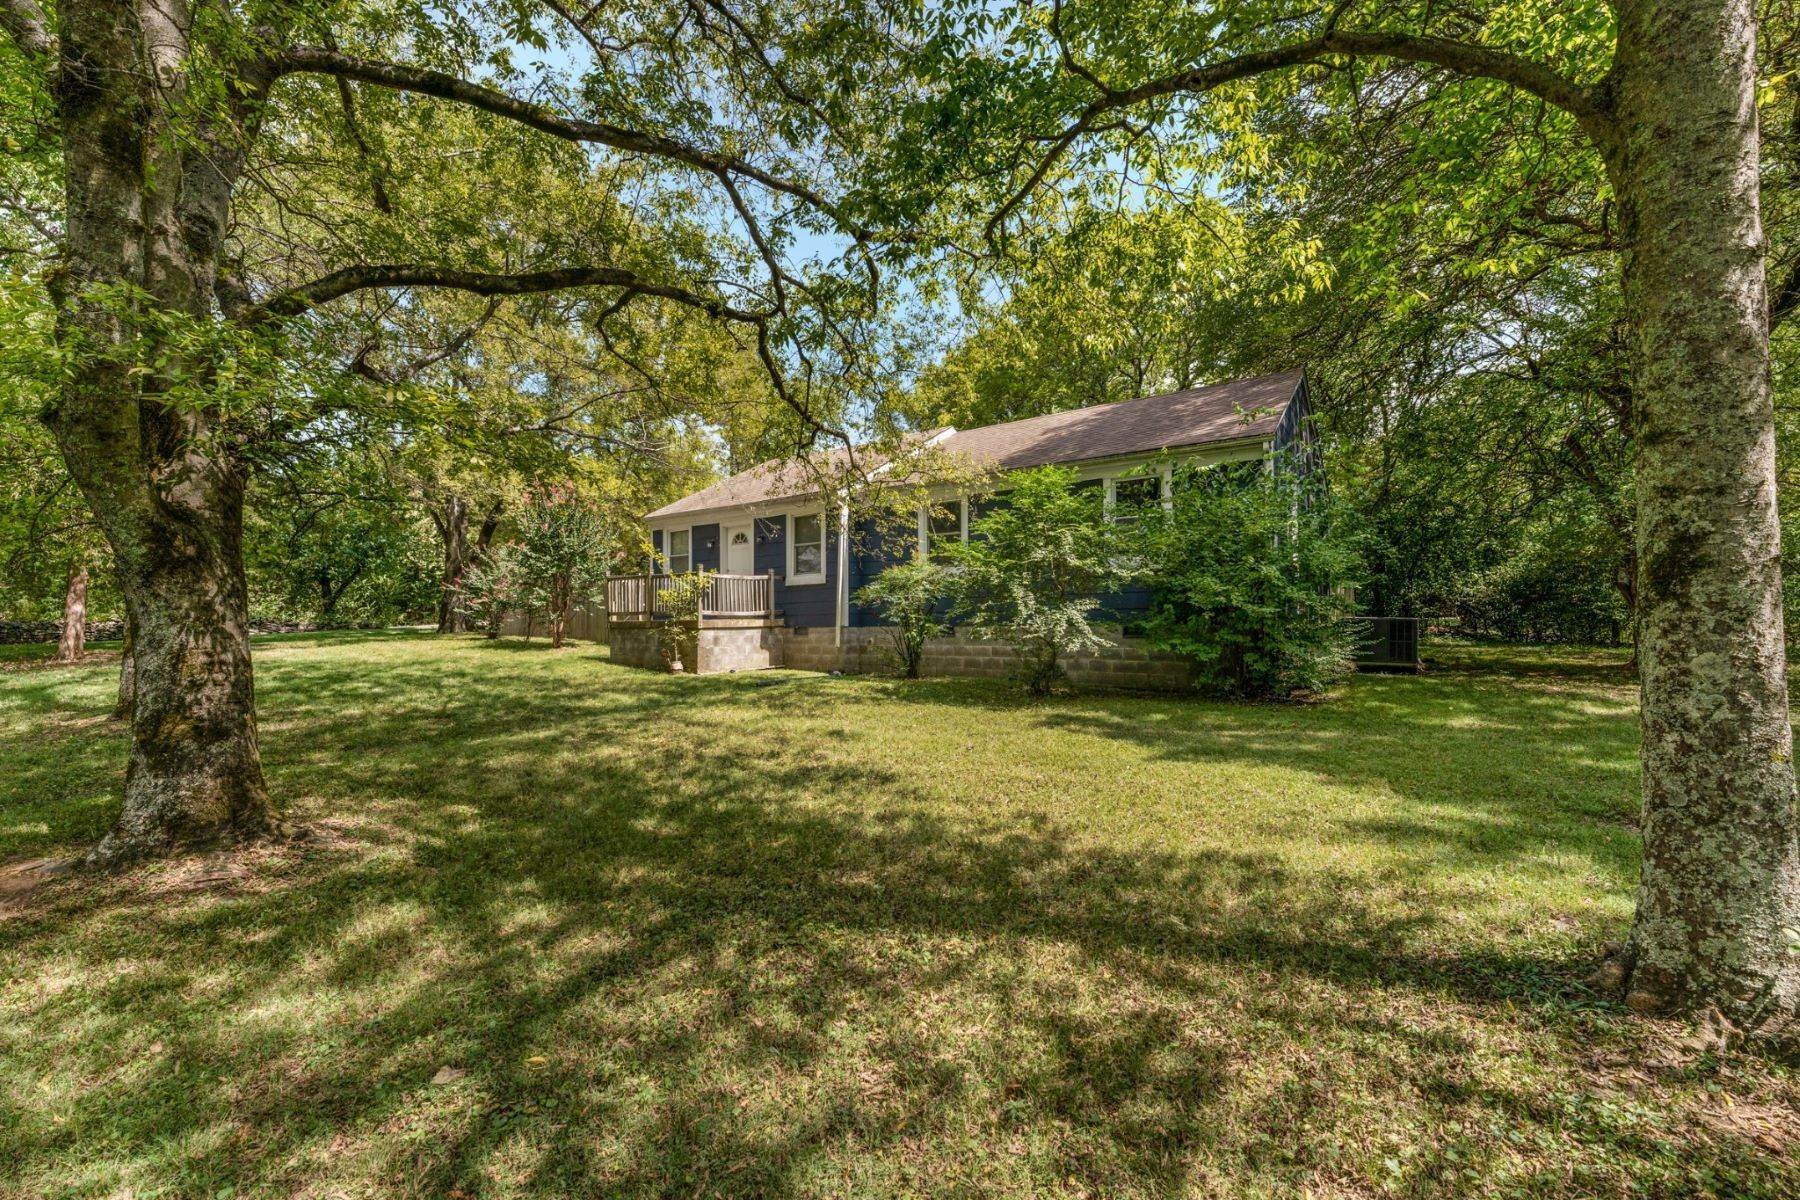 3. Single Family Homes for Sale at 740 Old Hickory Blvd, Nashville, TN, 37209 740 Old Hickory Blvd Nashville, Tennessee 37209 United States